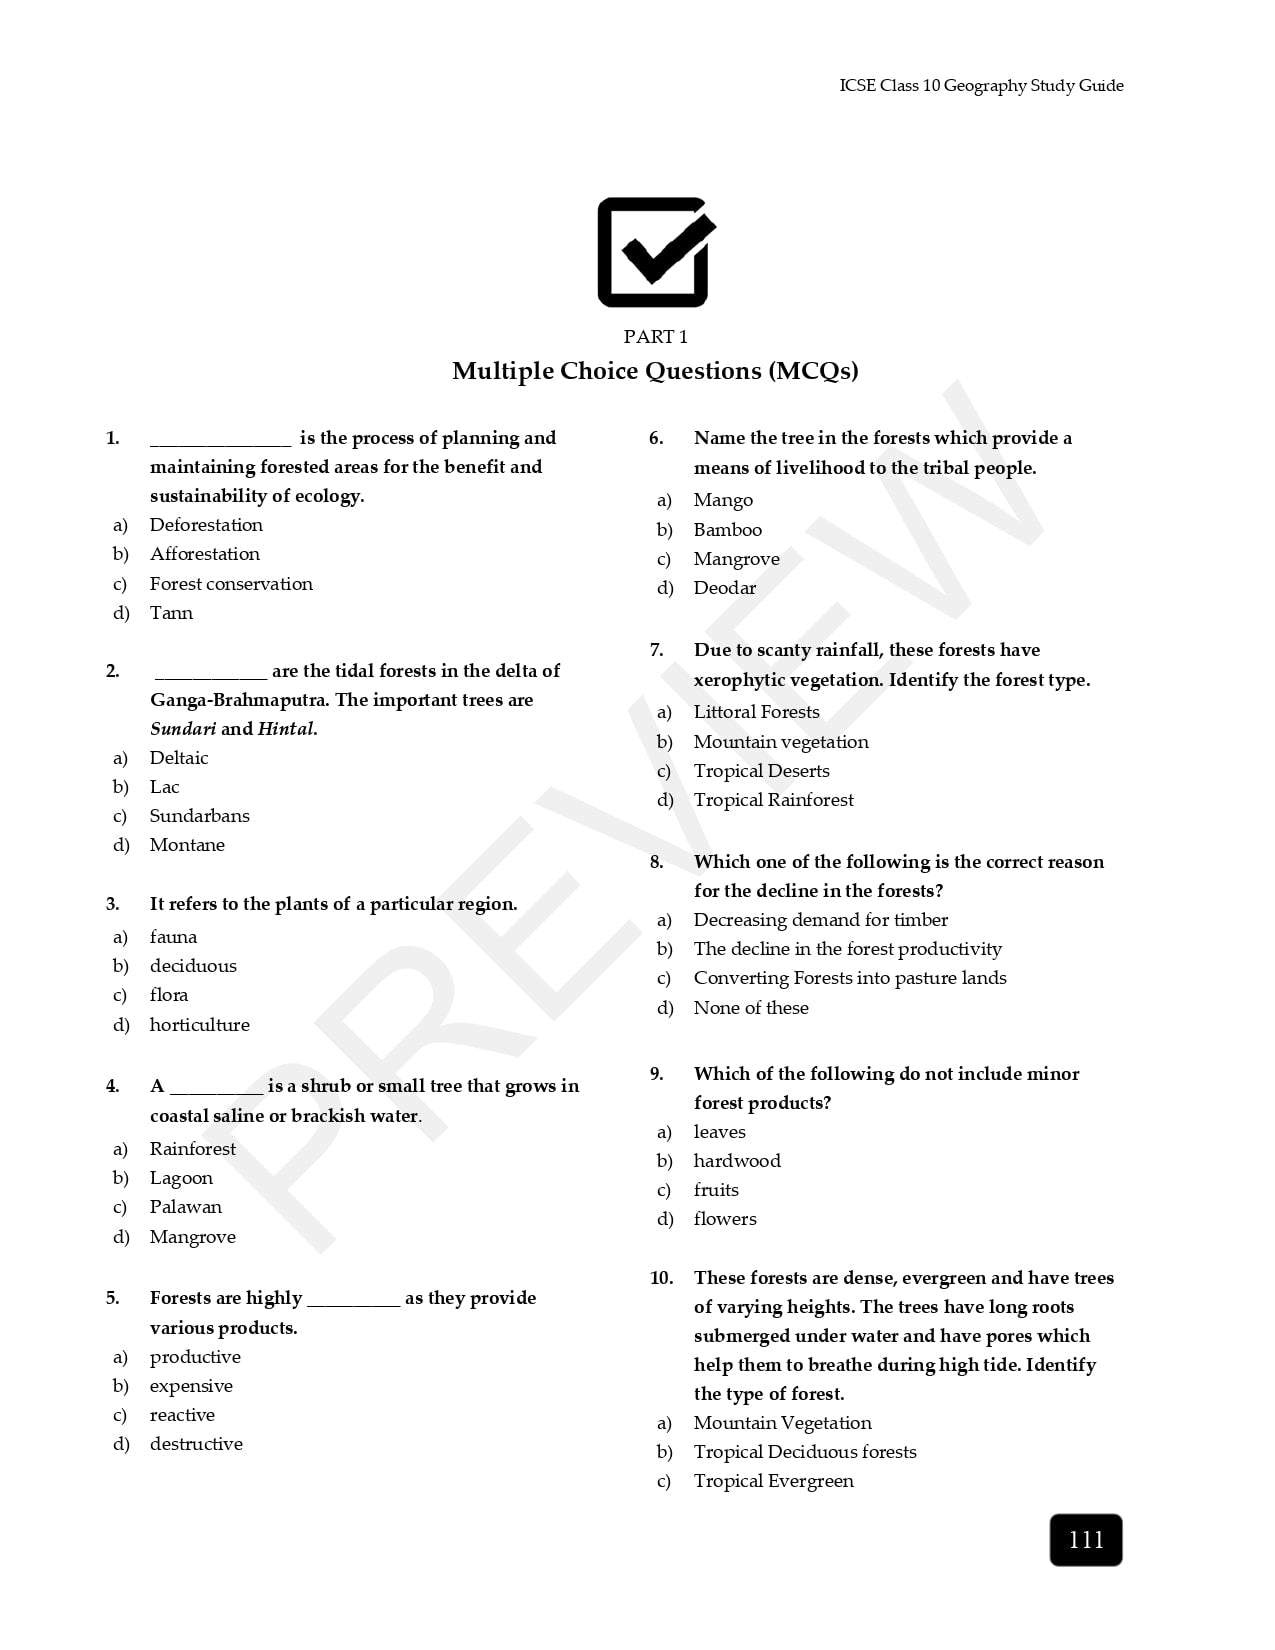 ICSE geogICSE geography study material for class 10raphy study material for class 10